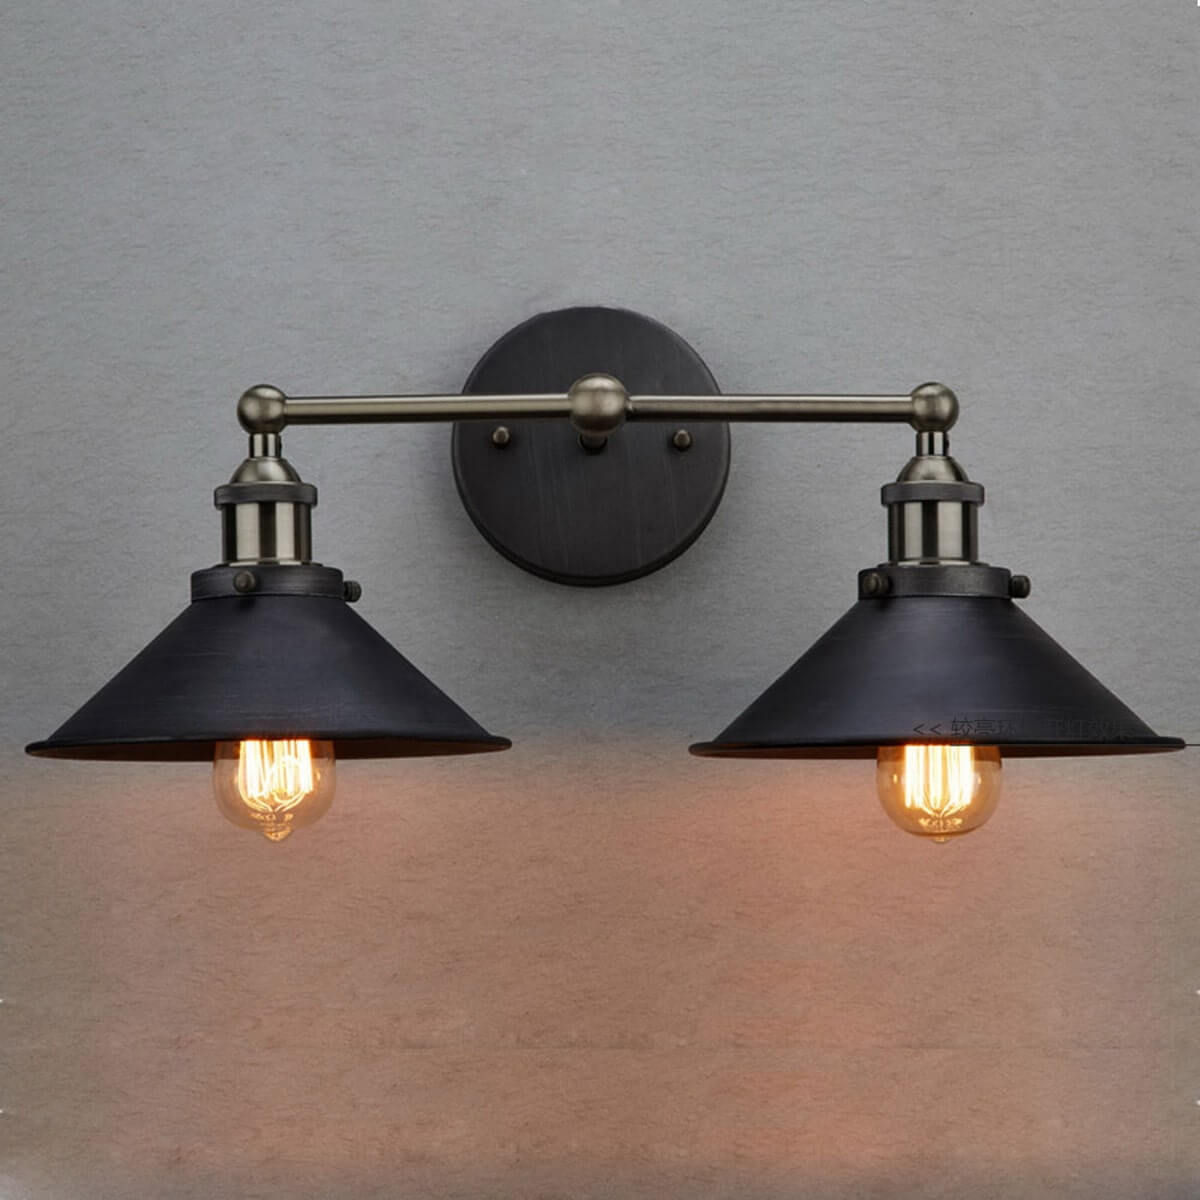 Free Shipping Antique Semi.. Industrial Oil Rubbed Bronze Wall Sconce Lighting 